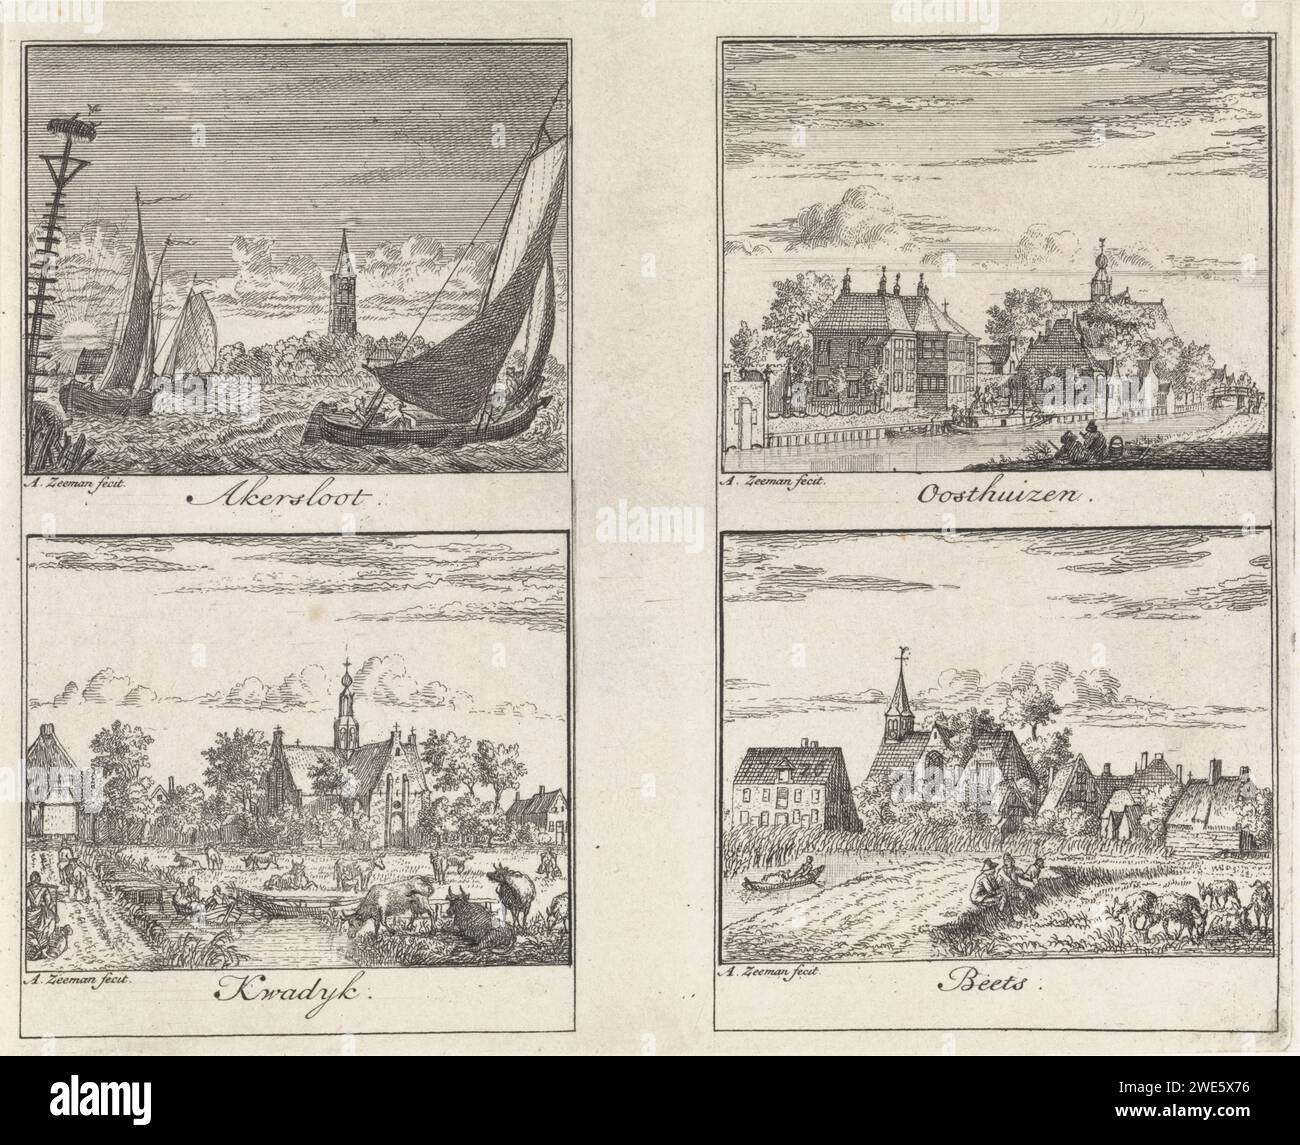 Faces on Akersloot, Kwadijk, Oosthuizen and Beets, Abraham Zeeman, 1732 print Four performances on a magazine. At the top left: View of the village of Akersloot with sailing ships on the Alkmaardermeer in the foreground. Bottom left: View of the village of Kwadijk. At the top right: View of the village of Oosthuizen. At the bottom right: View of the village of Beets. Amsterdam paper etching prospect of village, silhouette of village Akersloot. Kwadijk. Oosthuizen. Beets Stock Photo